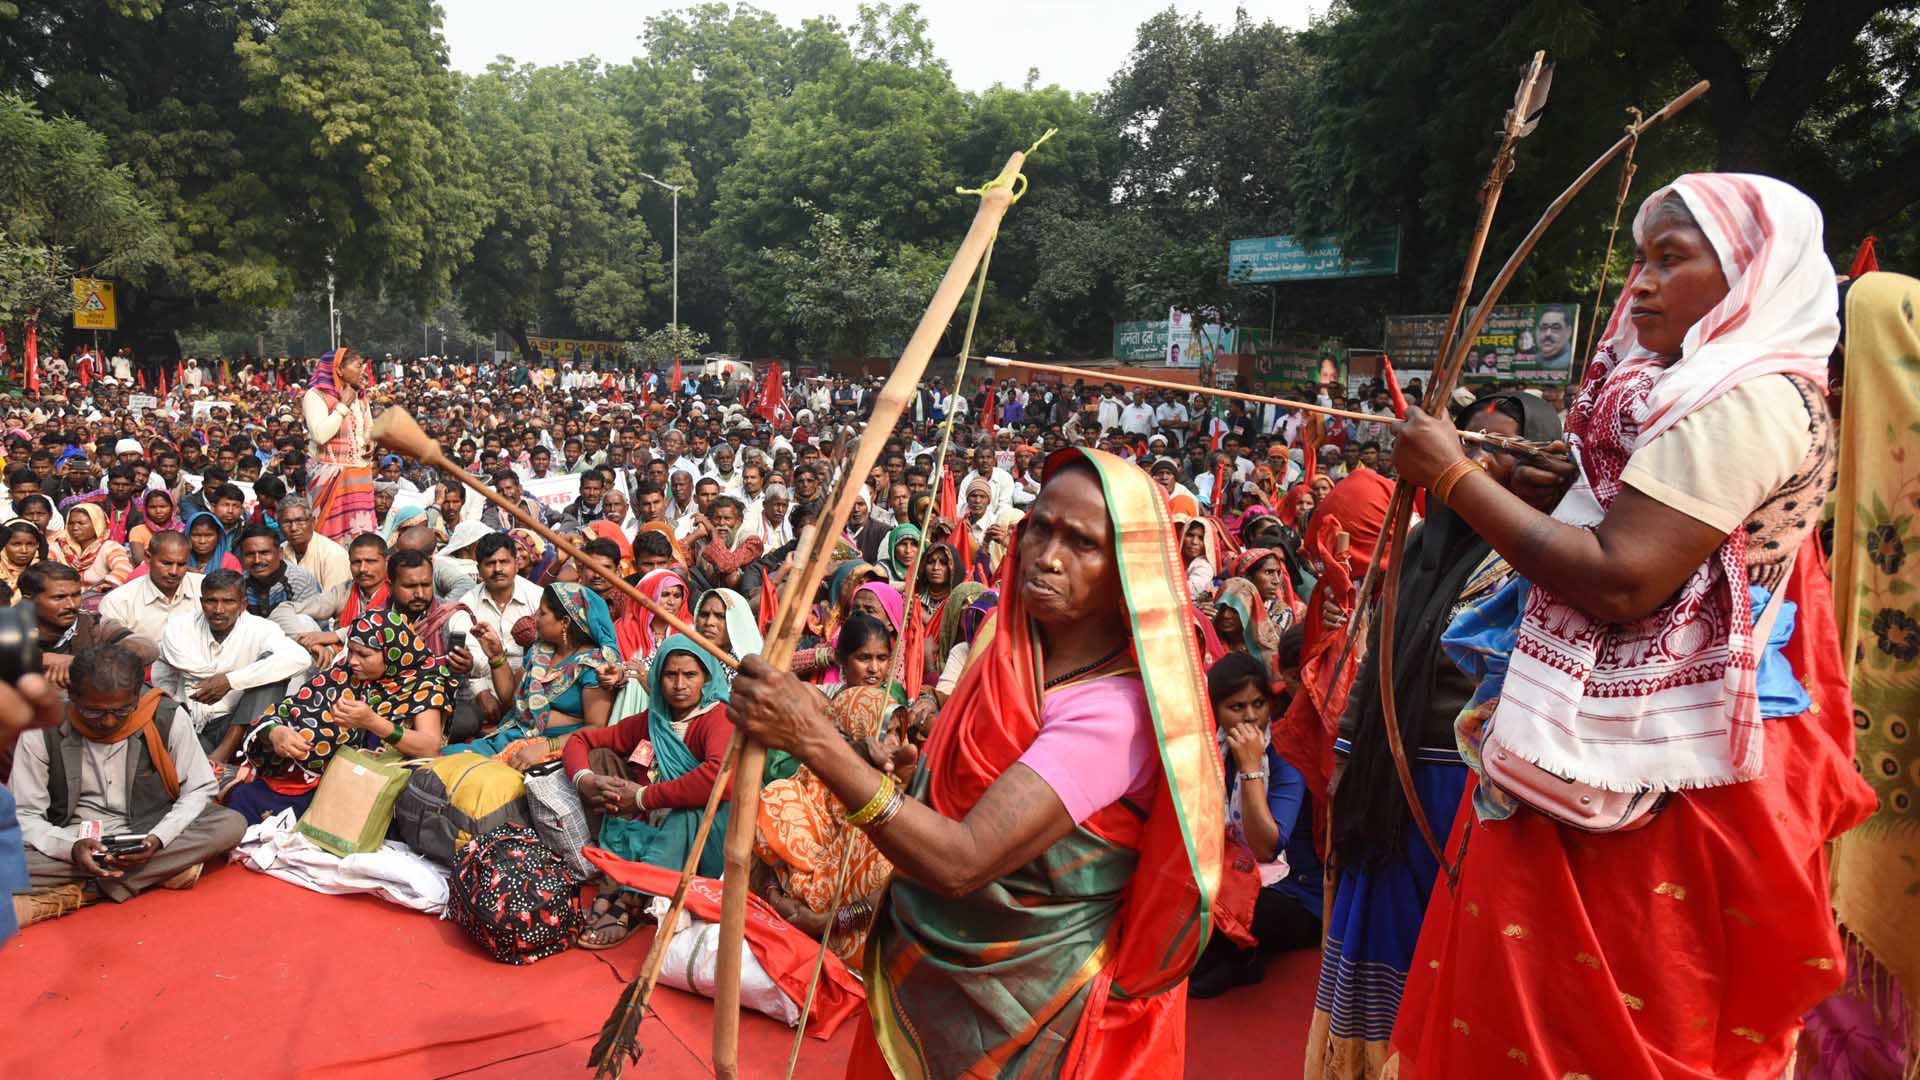 Adivasi, the indigenous peoples of India, protest to demand land and forest rights on November 21, 2019 in New Delhi.